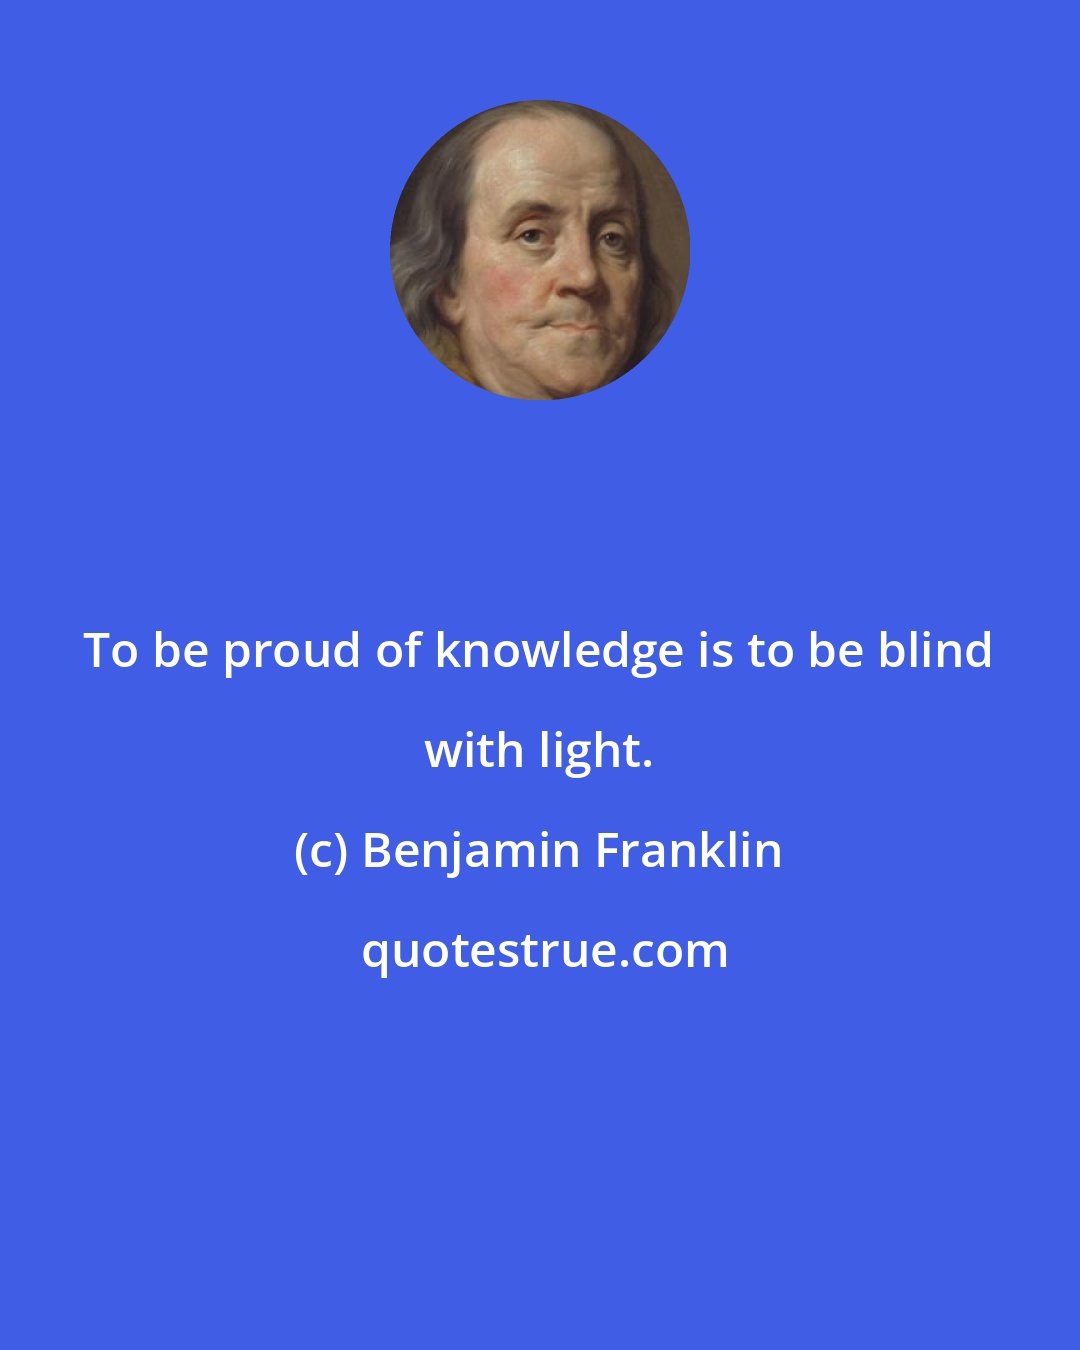 Benjamin Franklin: To be proud of knowledge is to be blind with light.